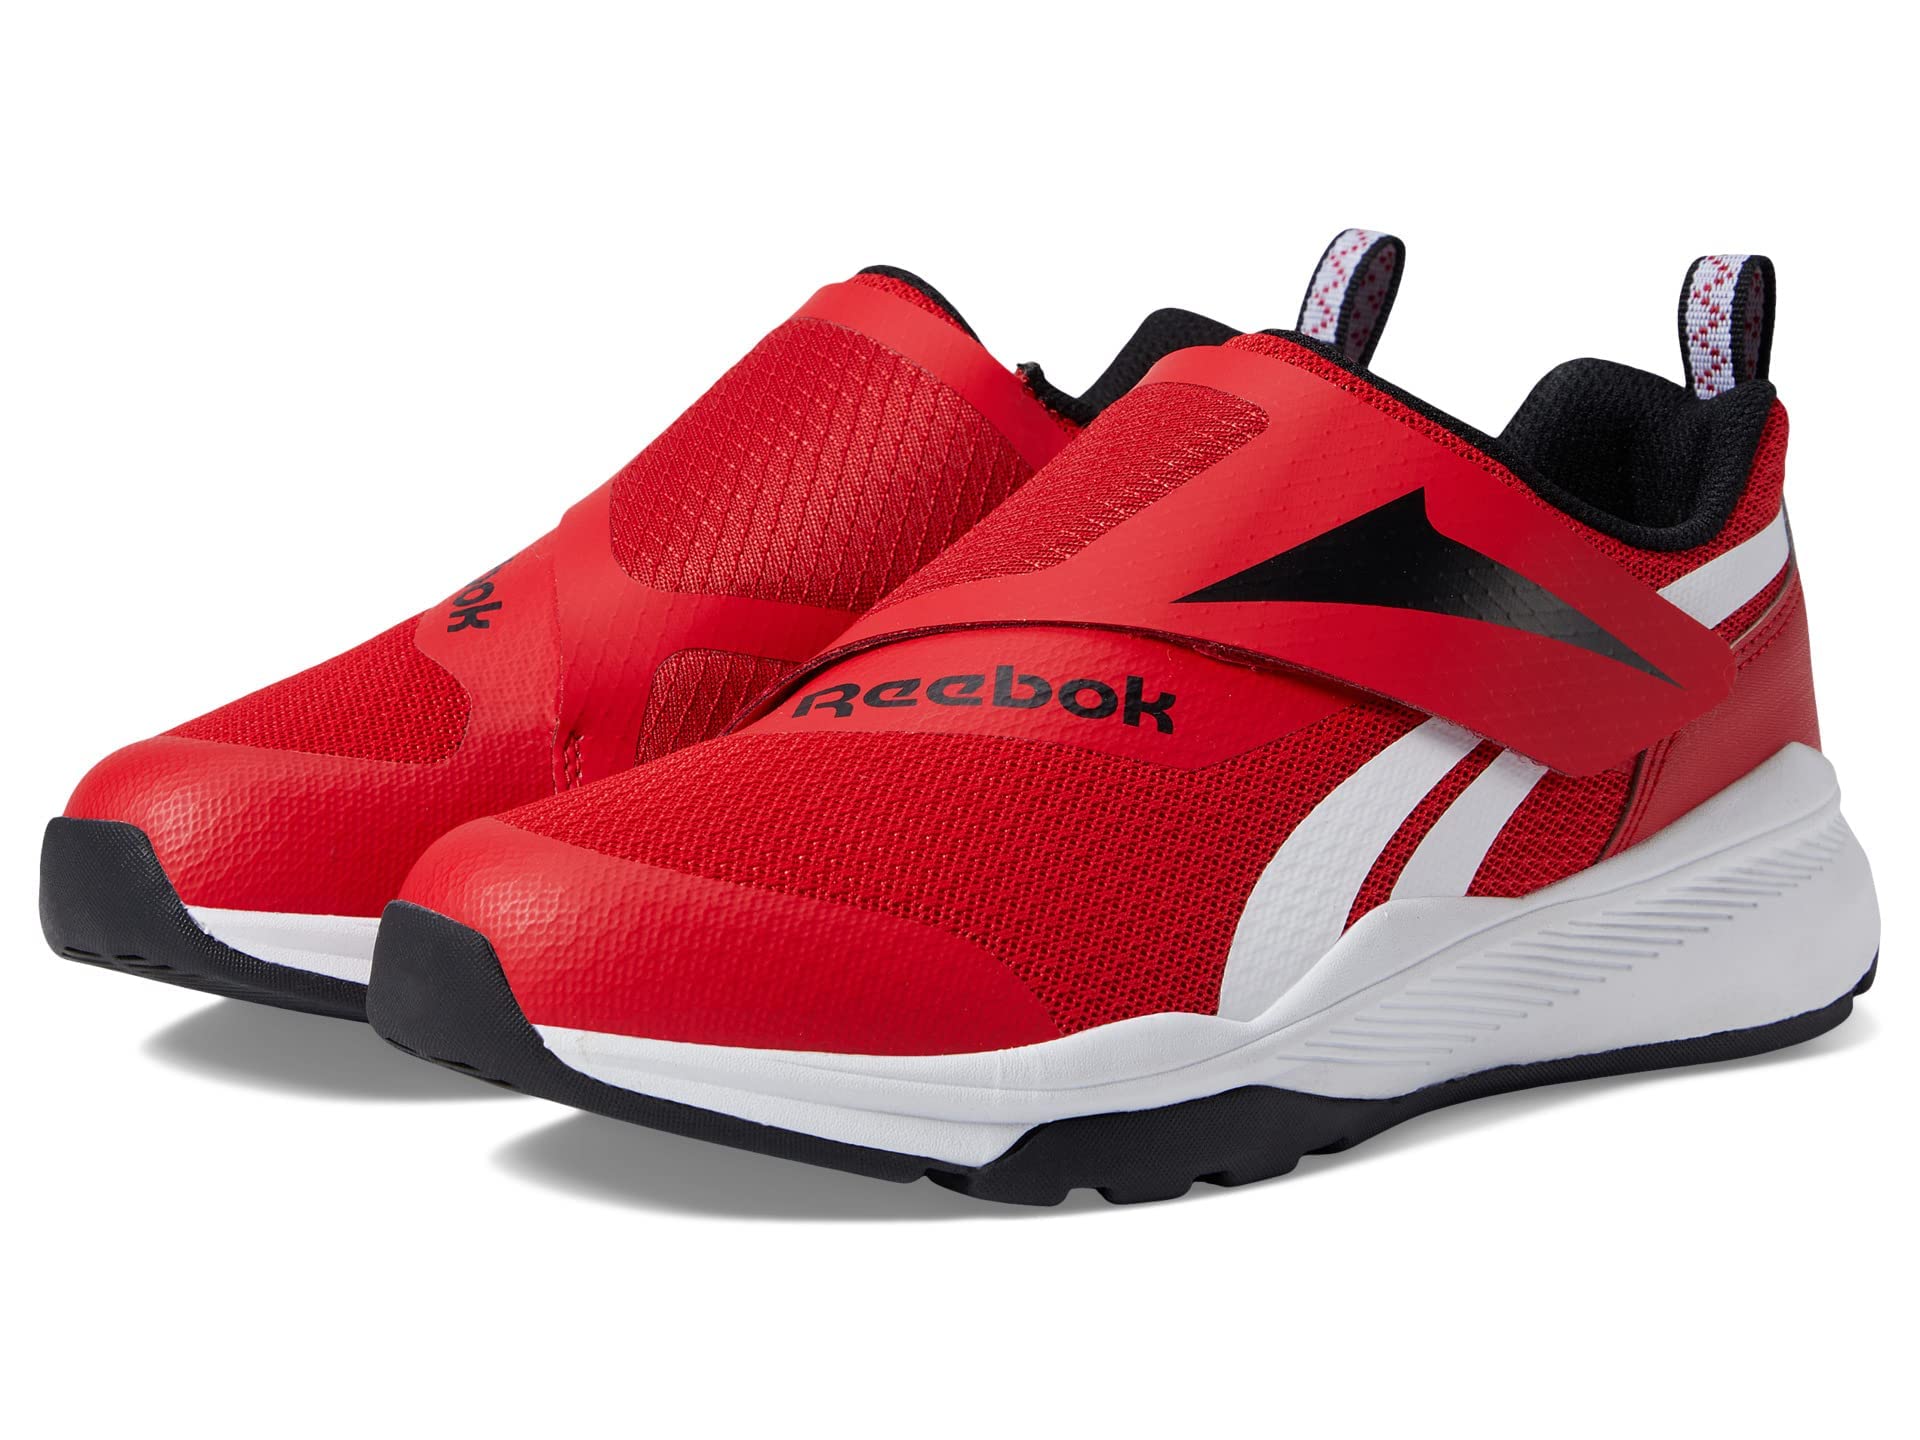 Reebok Equal Fit Adaptive Running Shoe, Vector Red/Black/White, 6.5 US Unisex Little Kid